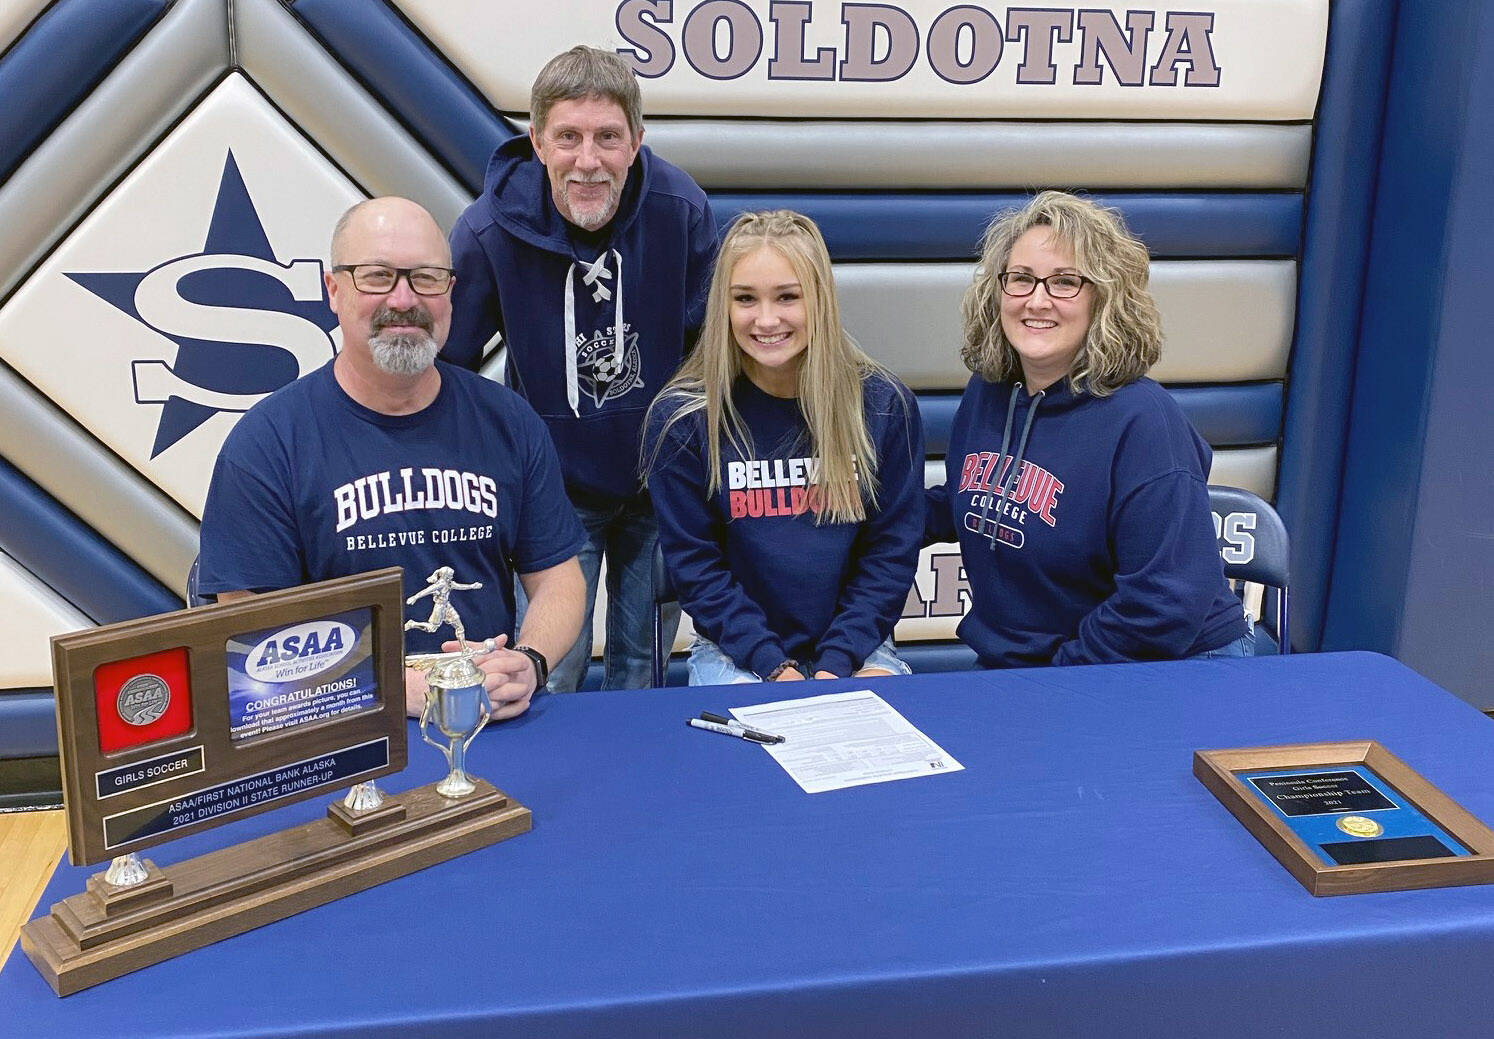 Soldotna High School senior Jolie Widaman signs her National Letter of Intent on Tuesday, Feb. 22, 2022, at Soldotna High School with her father, Matt Widaman; soccer coach, Jimmy Love; and mother, Jill DuFloth. (Photo provided)